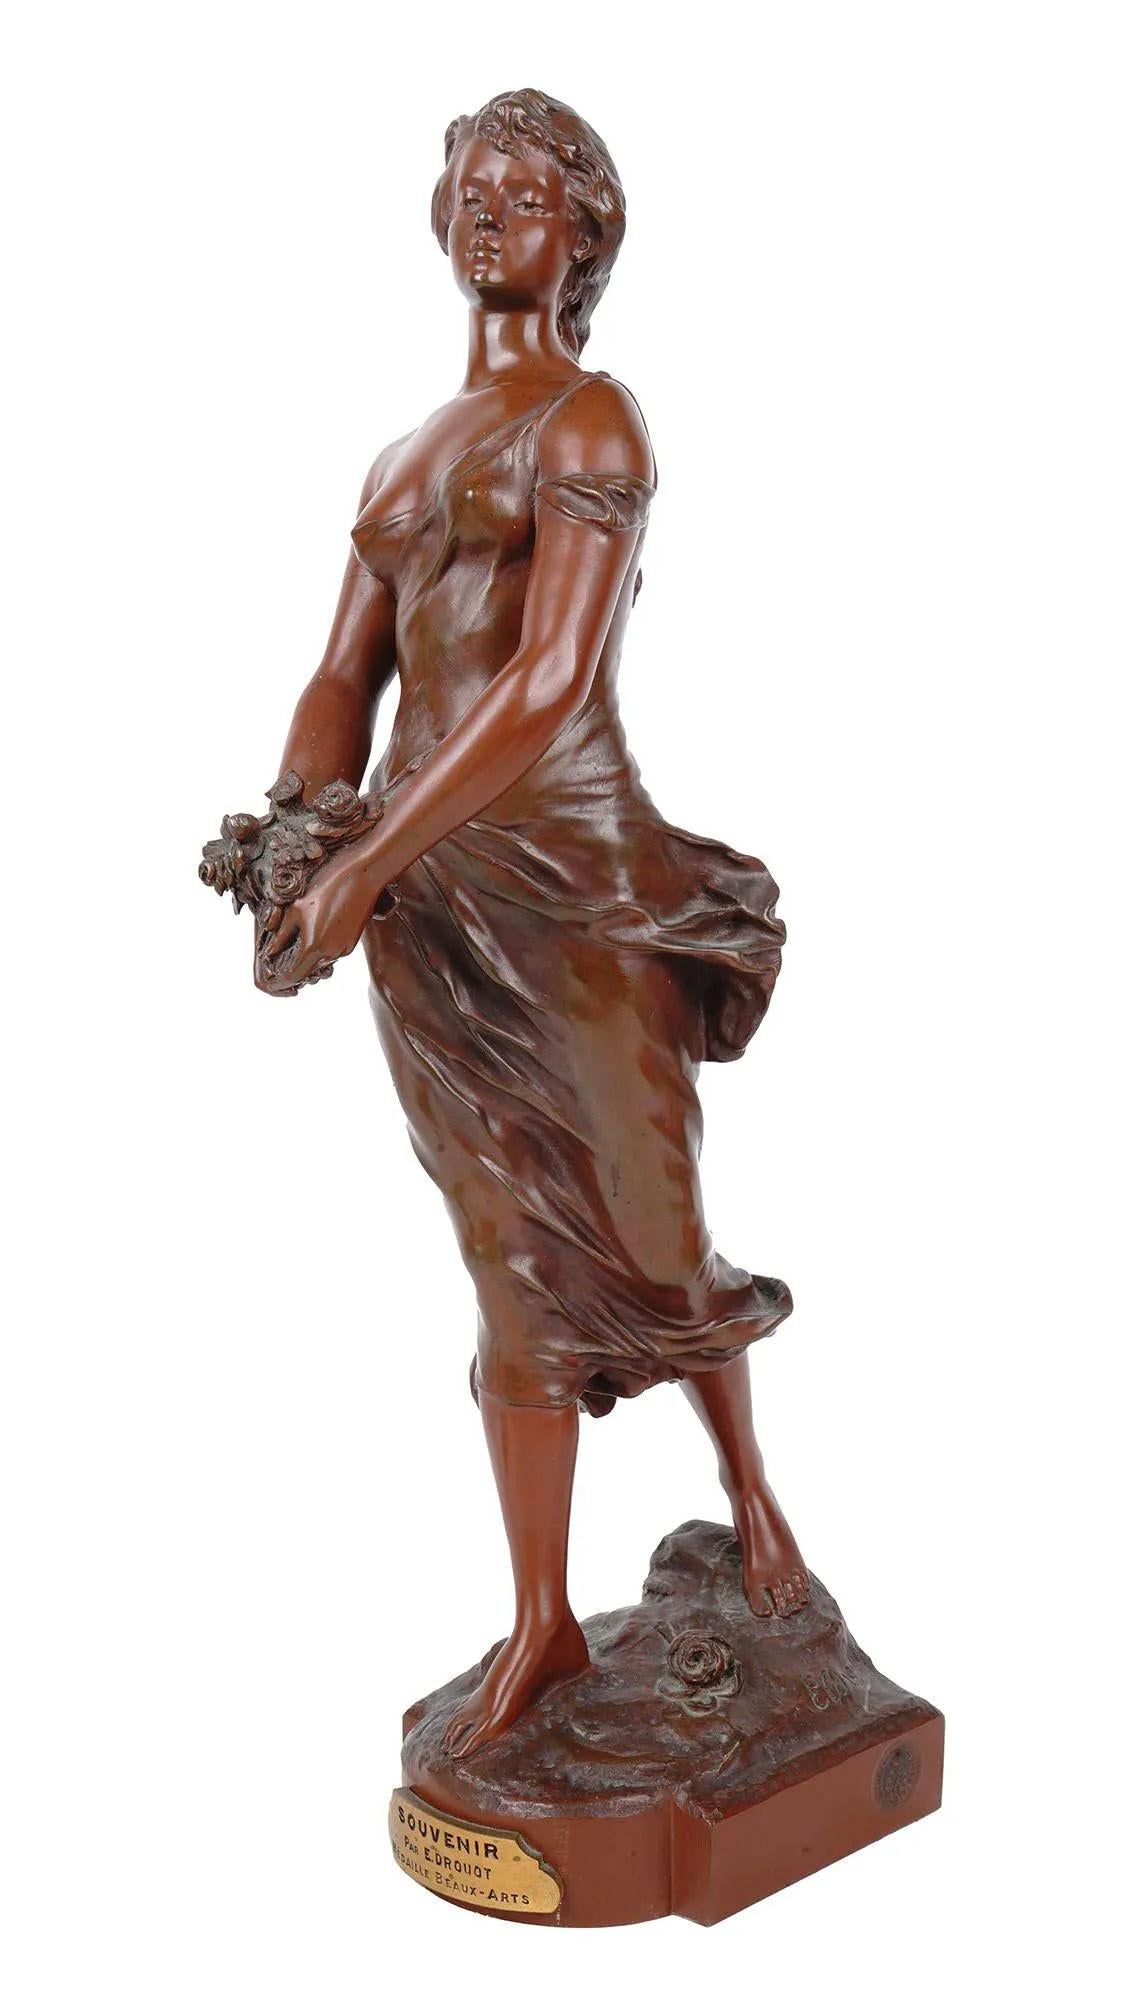 Our patinated bronze figurine of a lovely female holding a bouquet of flowers after Edouard Drouot (1859 - 1945) is entitled Souvenir. Base carries a plaque that carries the title and artist's name and Medaille de Beaux-Arts, no doubt a reference to